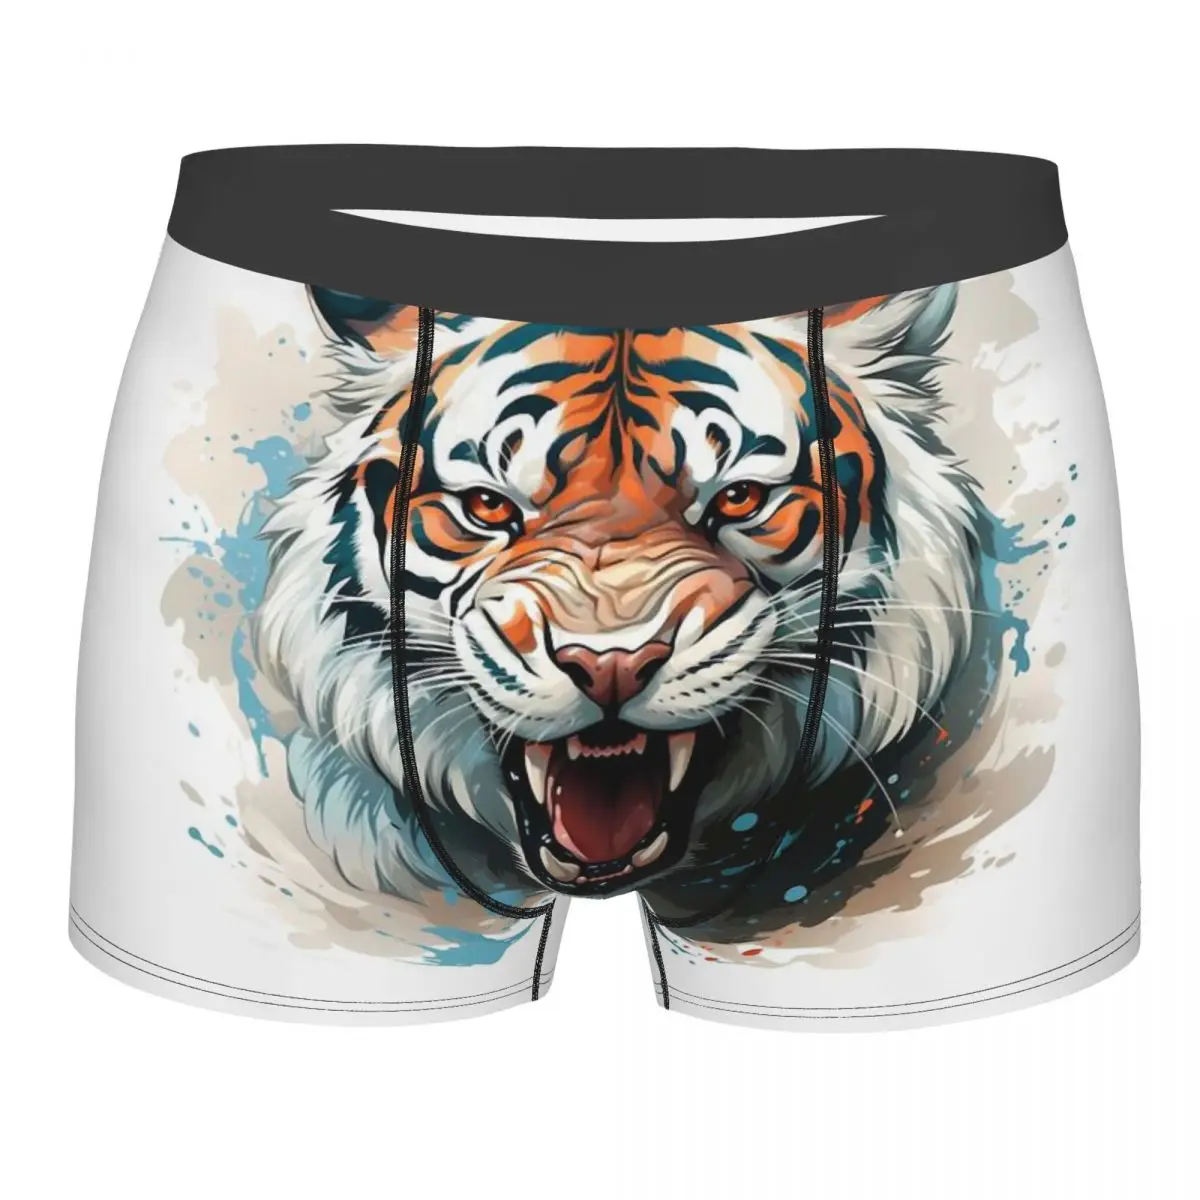 Cool Animals, Lions, Tigers, Mencosy Boxer Briefs,3D printing Underwear, Highly Breathable Top Quality Gift Idea cool animals lions tigers mencosy boxer briefs 3d printing underwear highly breathable top quality gift idea